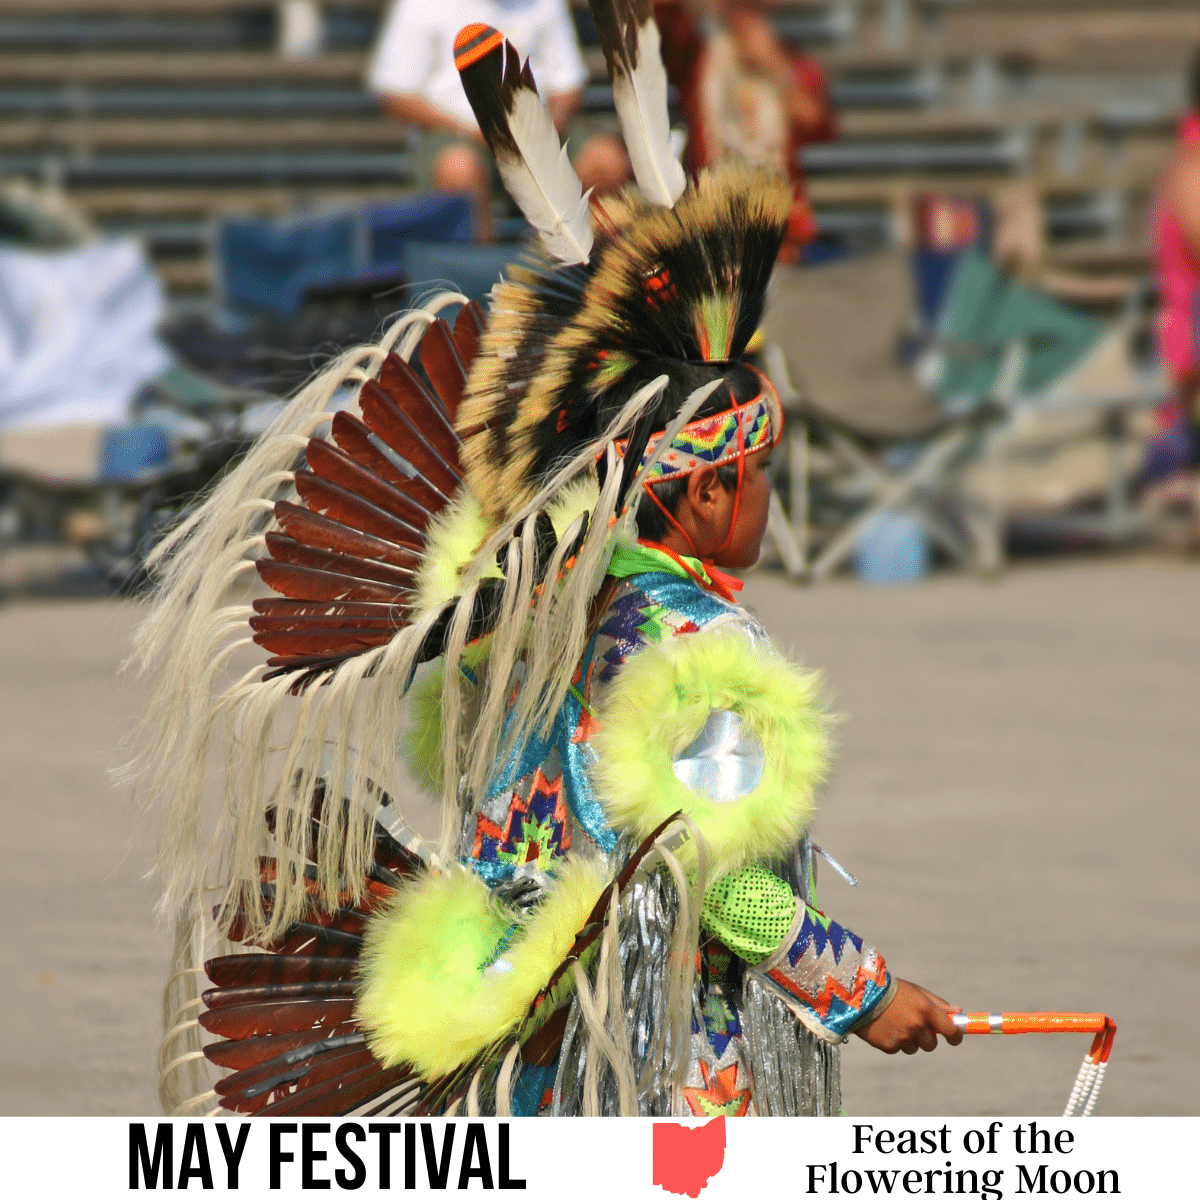 A square image of a person in Native American ceremonial attire, with a crowd watching from the stands in the background. A white strip across the bottom has text May Festival Feast of the Flowering Moon.